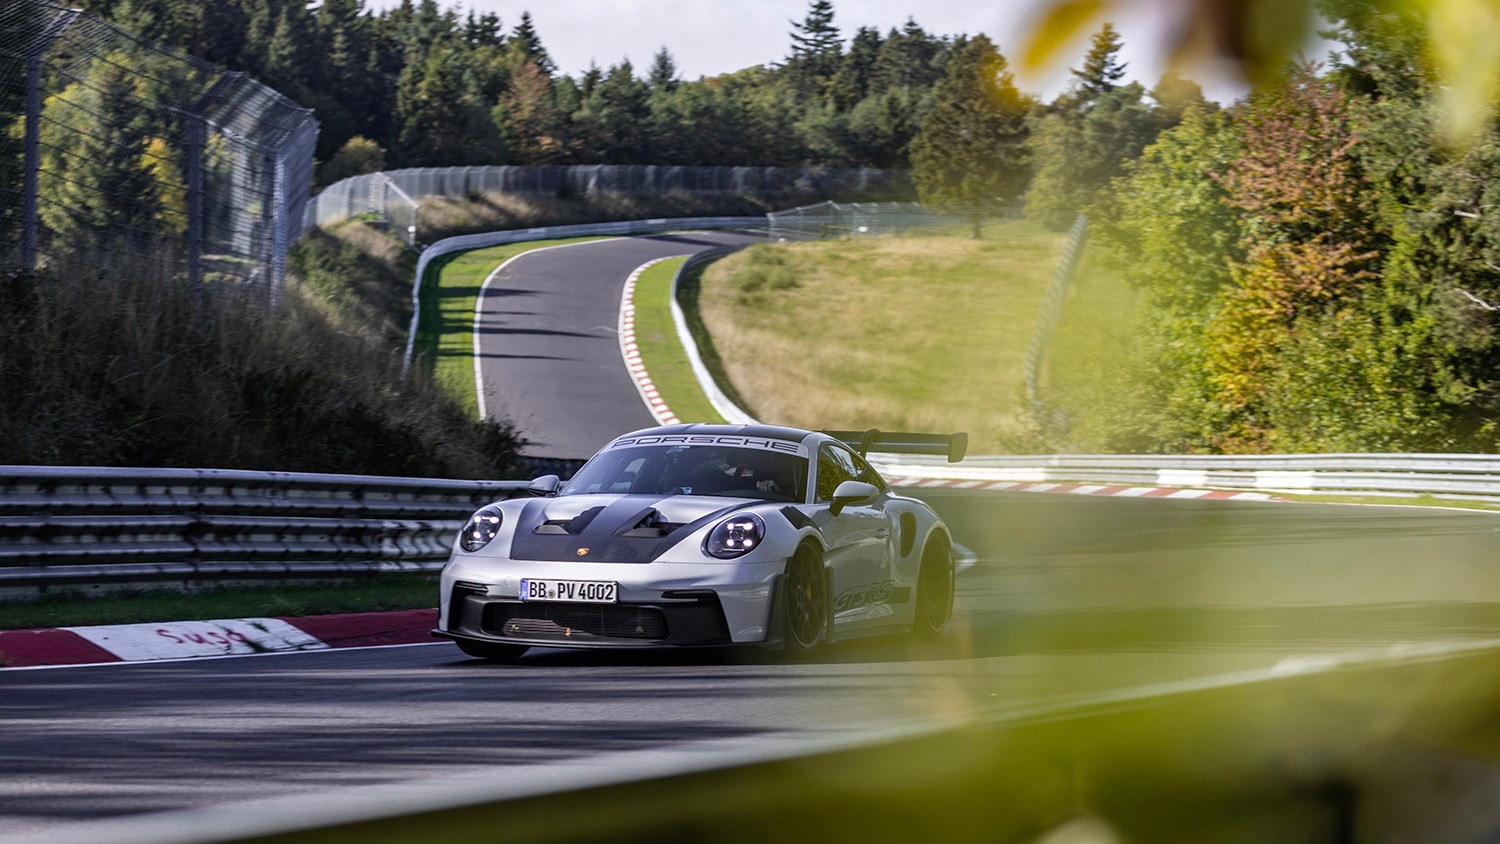 Porsche 911 GT3 RS in silver driving on the Nundefinedrburgring